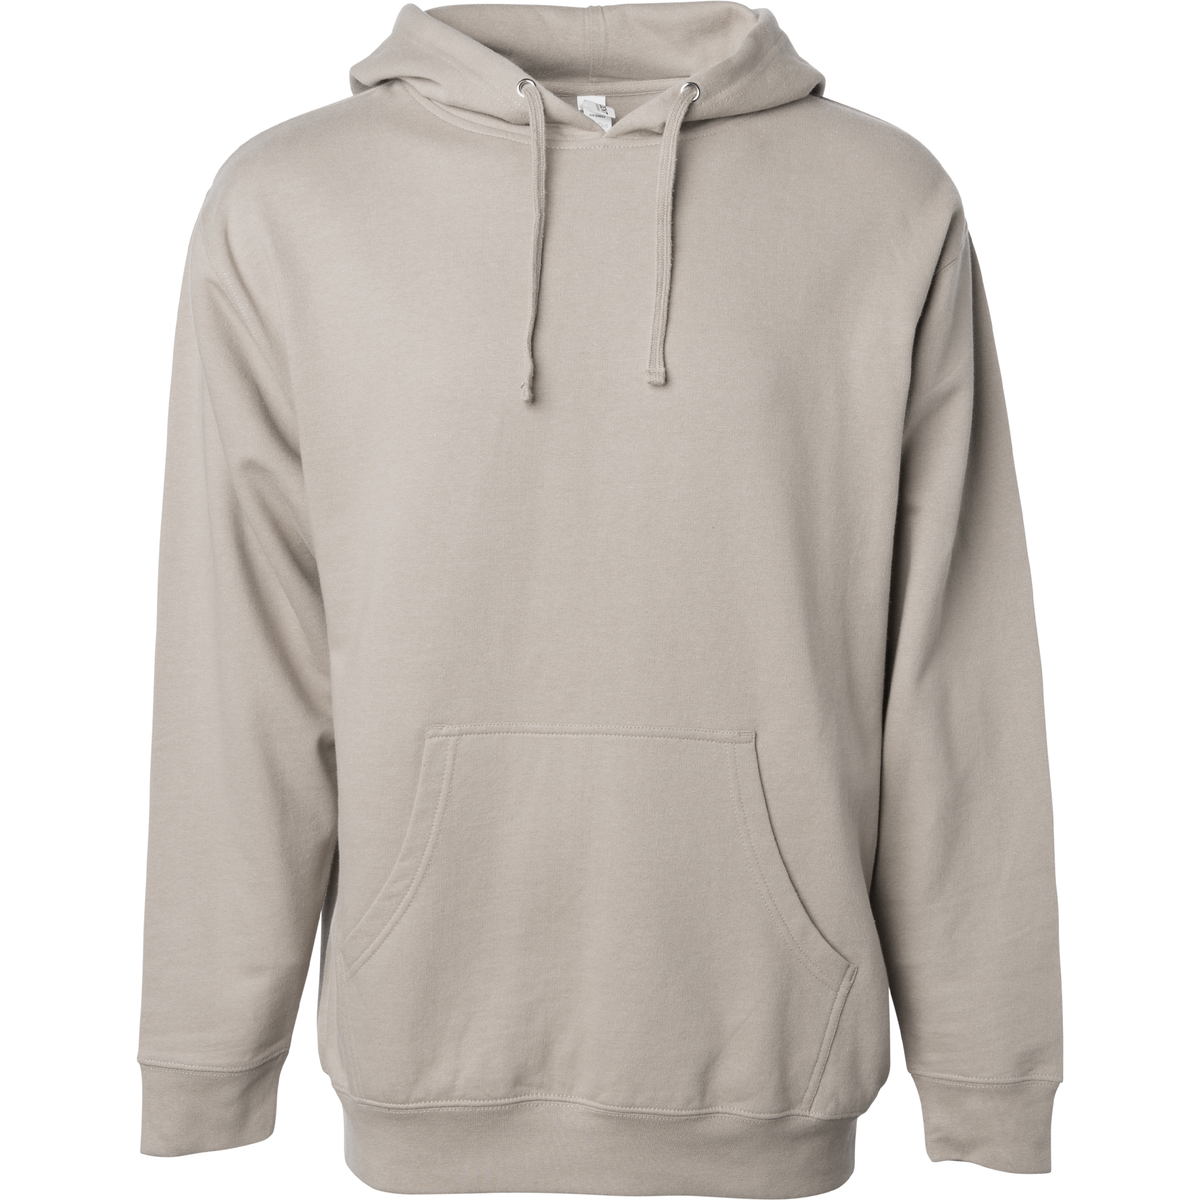 SS4500 #2 - Midweight Hooded Pullover Sweatshirt